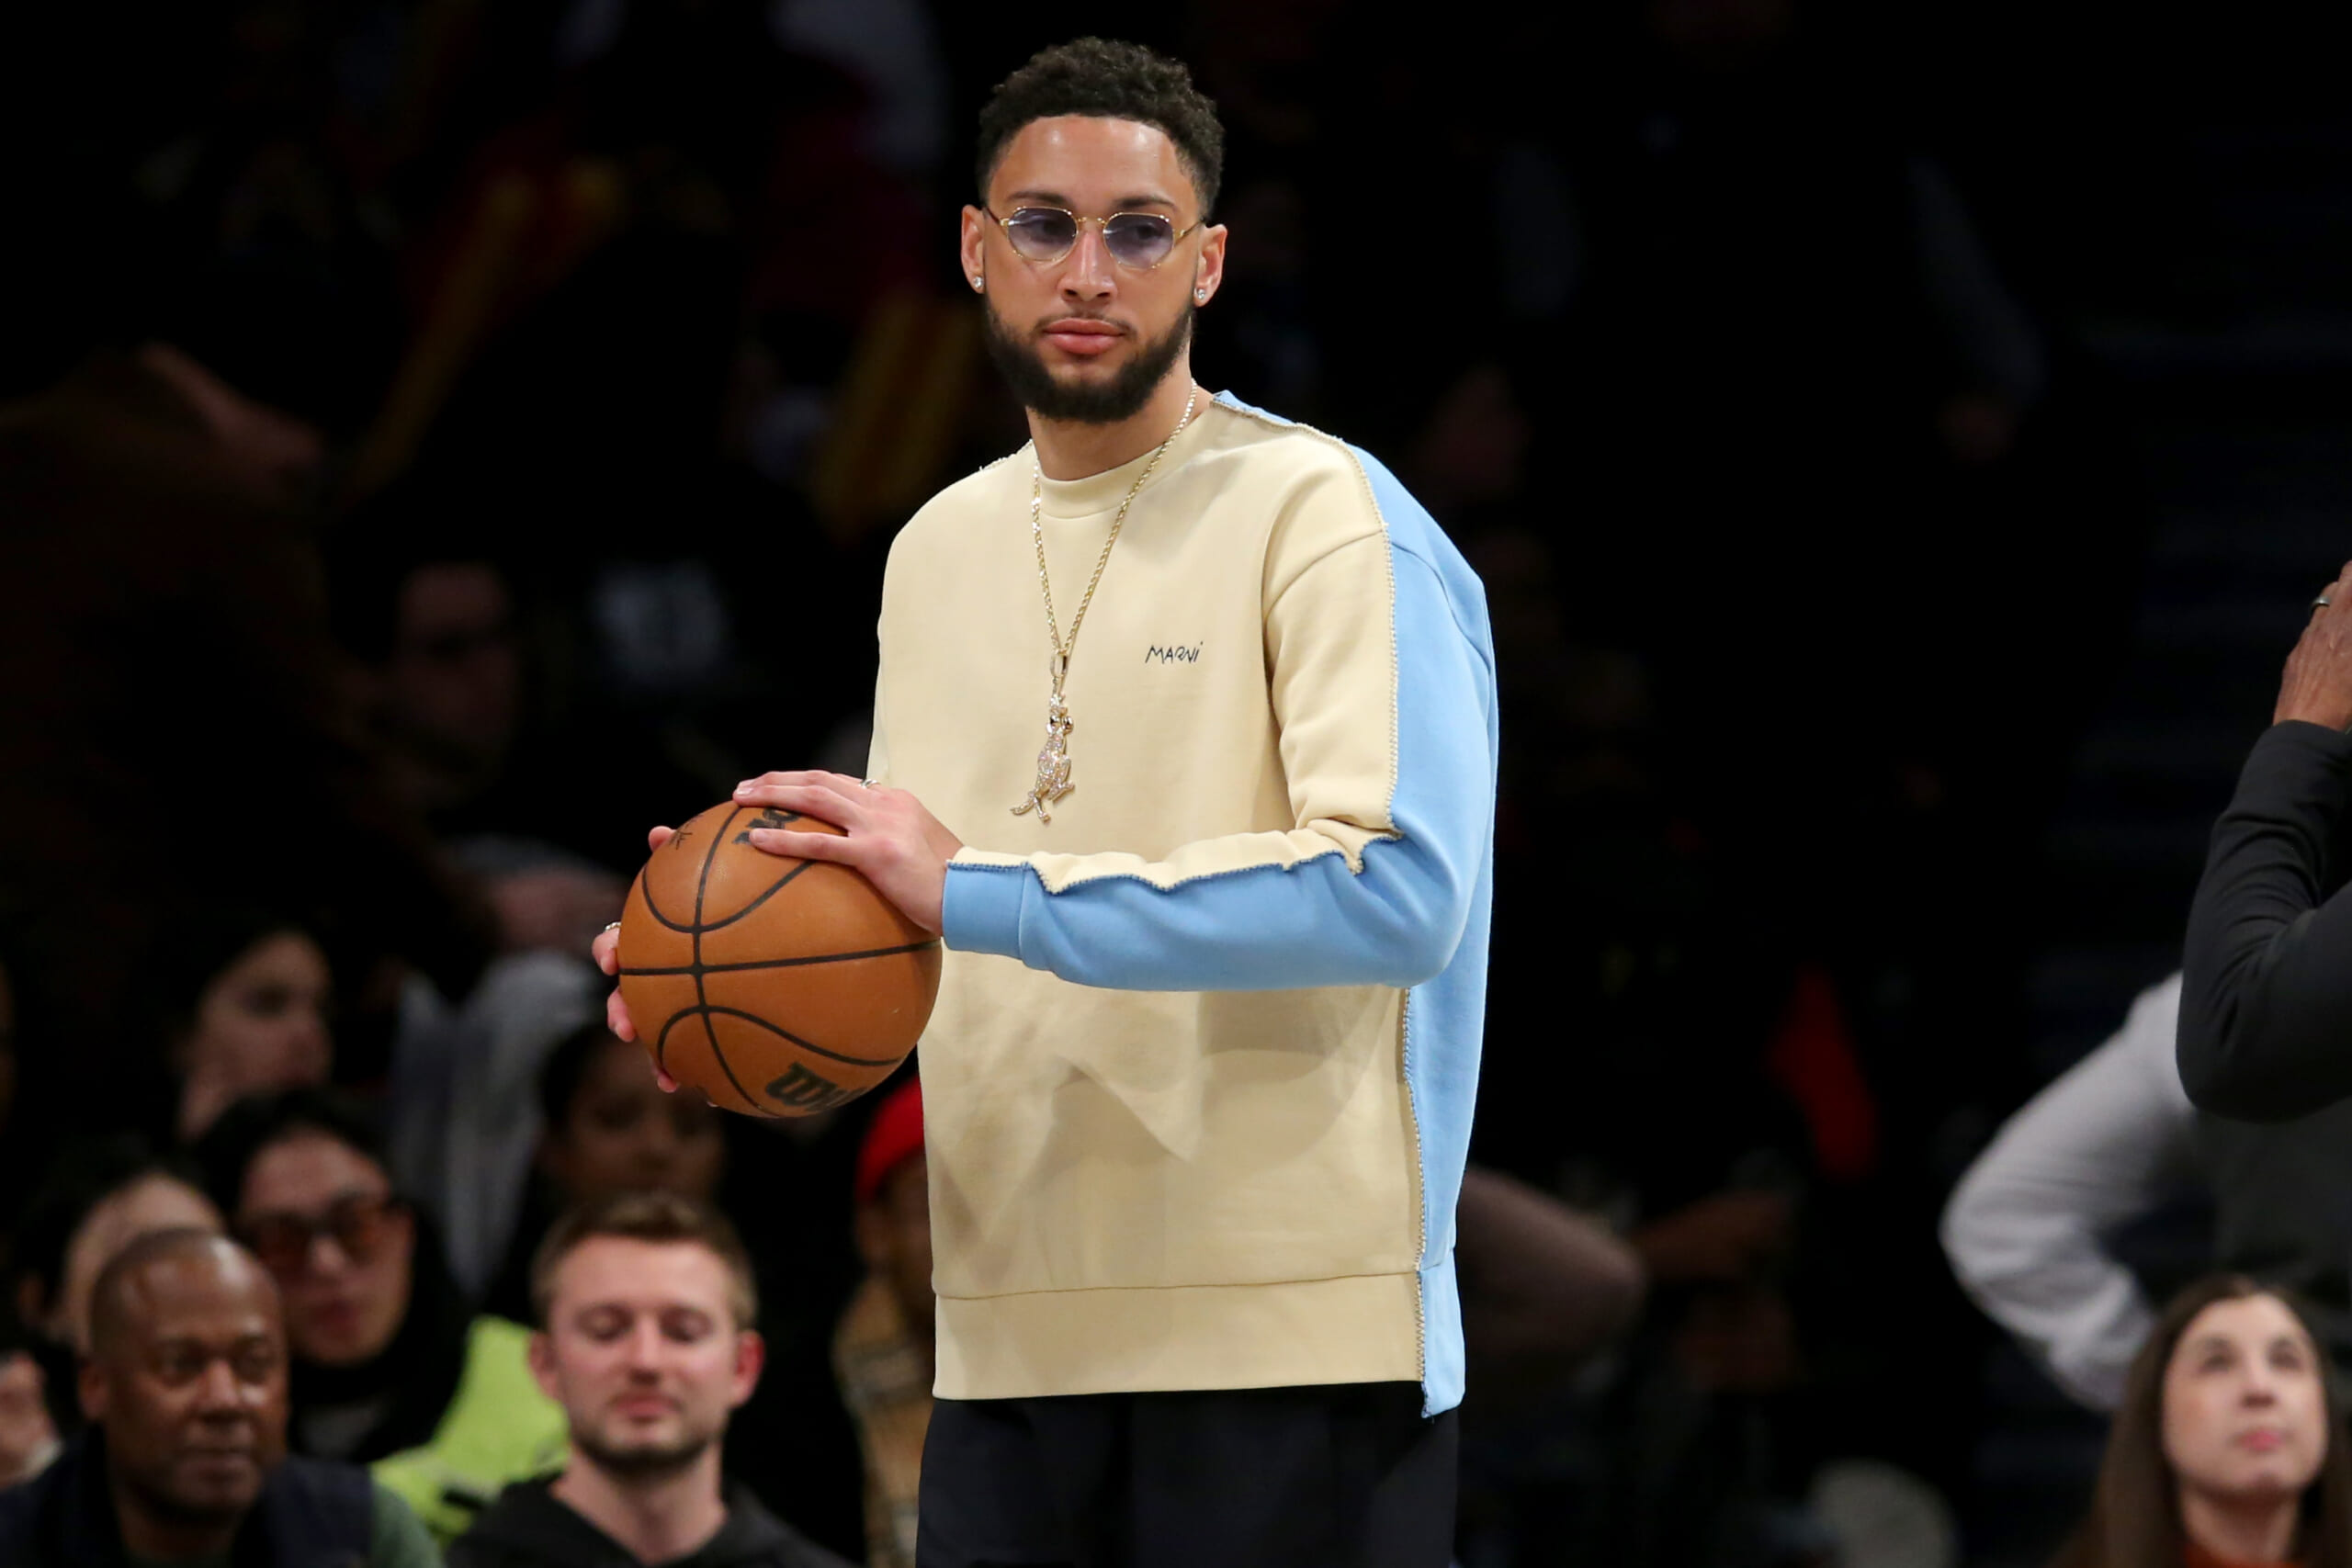 Stateside Vodka is trading $25 gift cards for Ben Simmons jerseys, then  donating them to a Brooklyn shelter